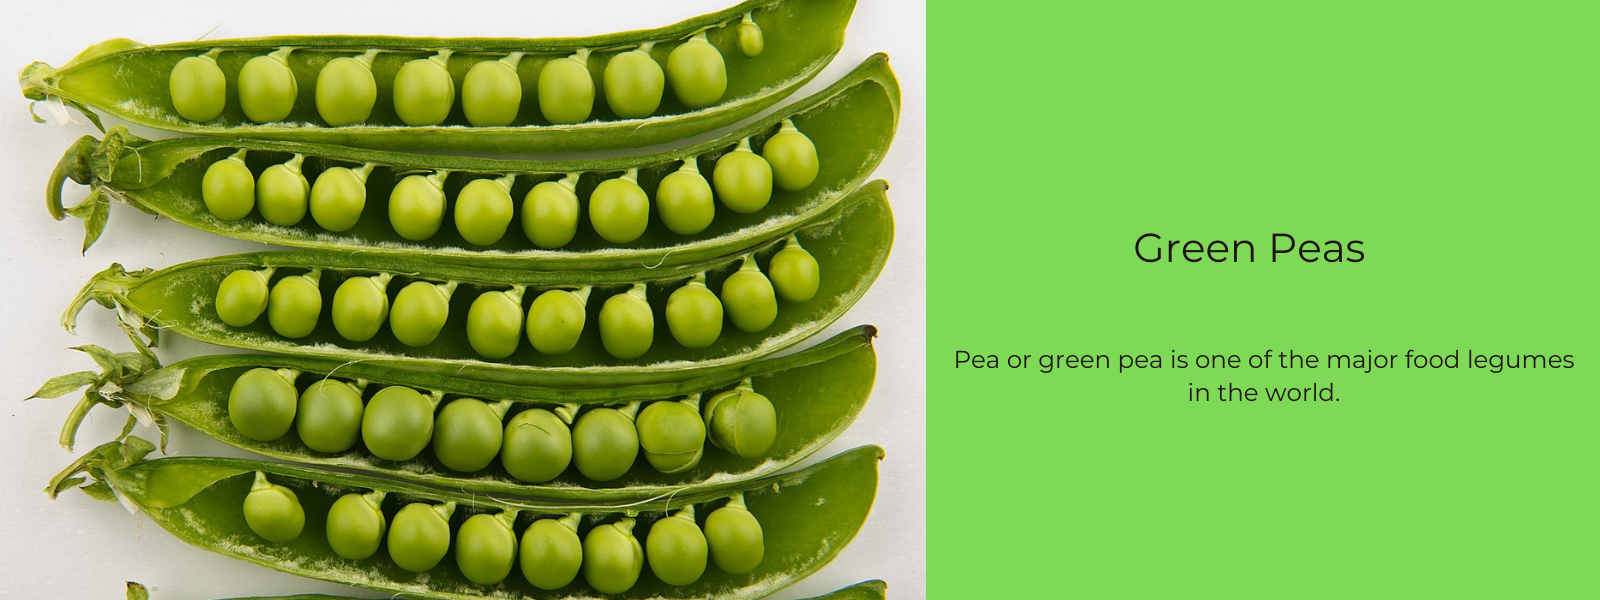 Green Peas– Health Benefits, Uses and Important Facts